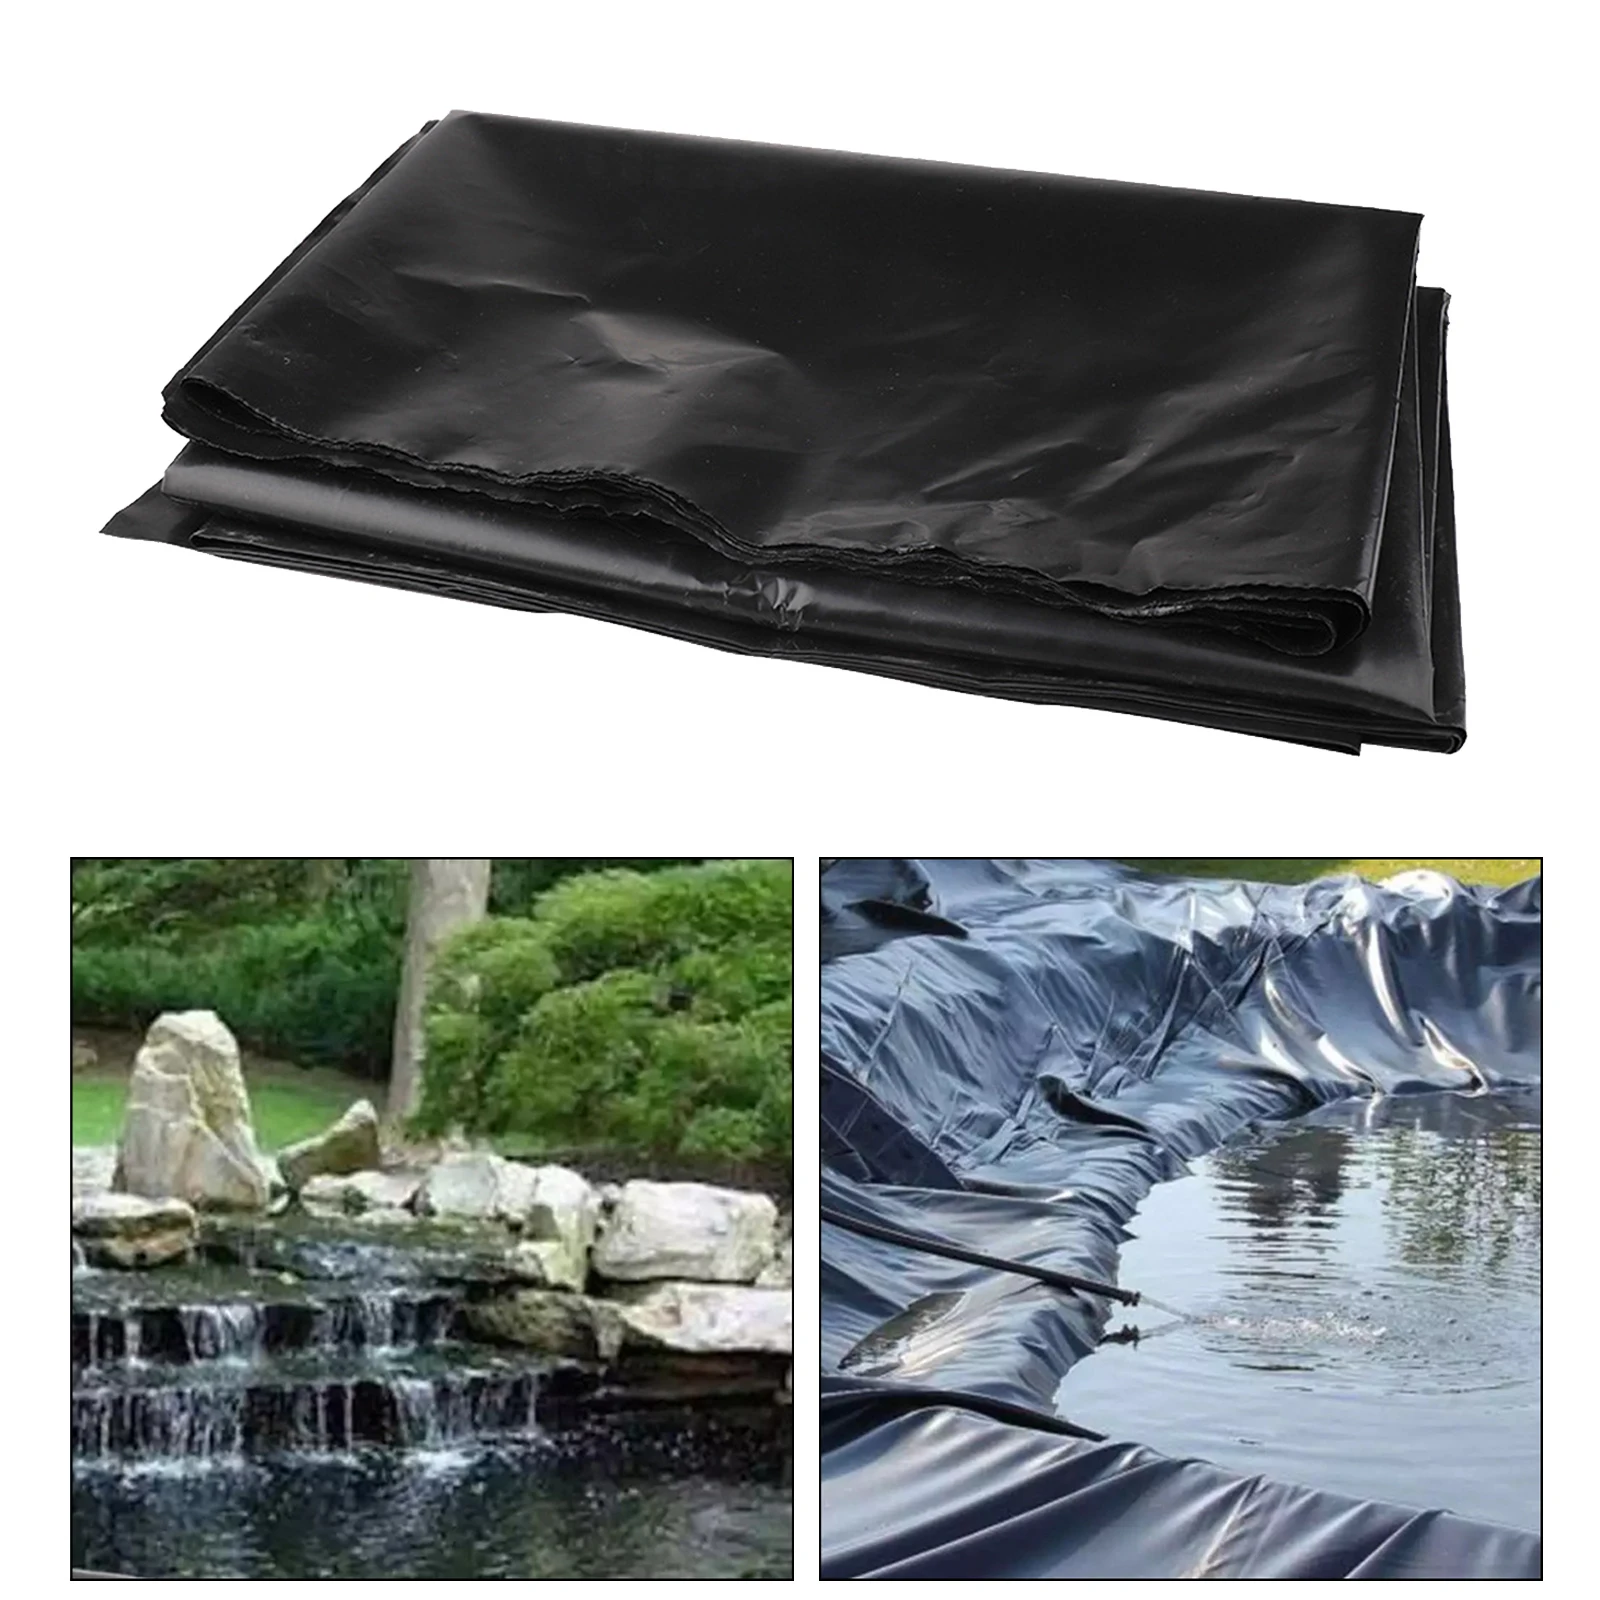 Fish Pond Liners Pool Pond Waterproof Liner Cloth for Water Garden